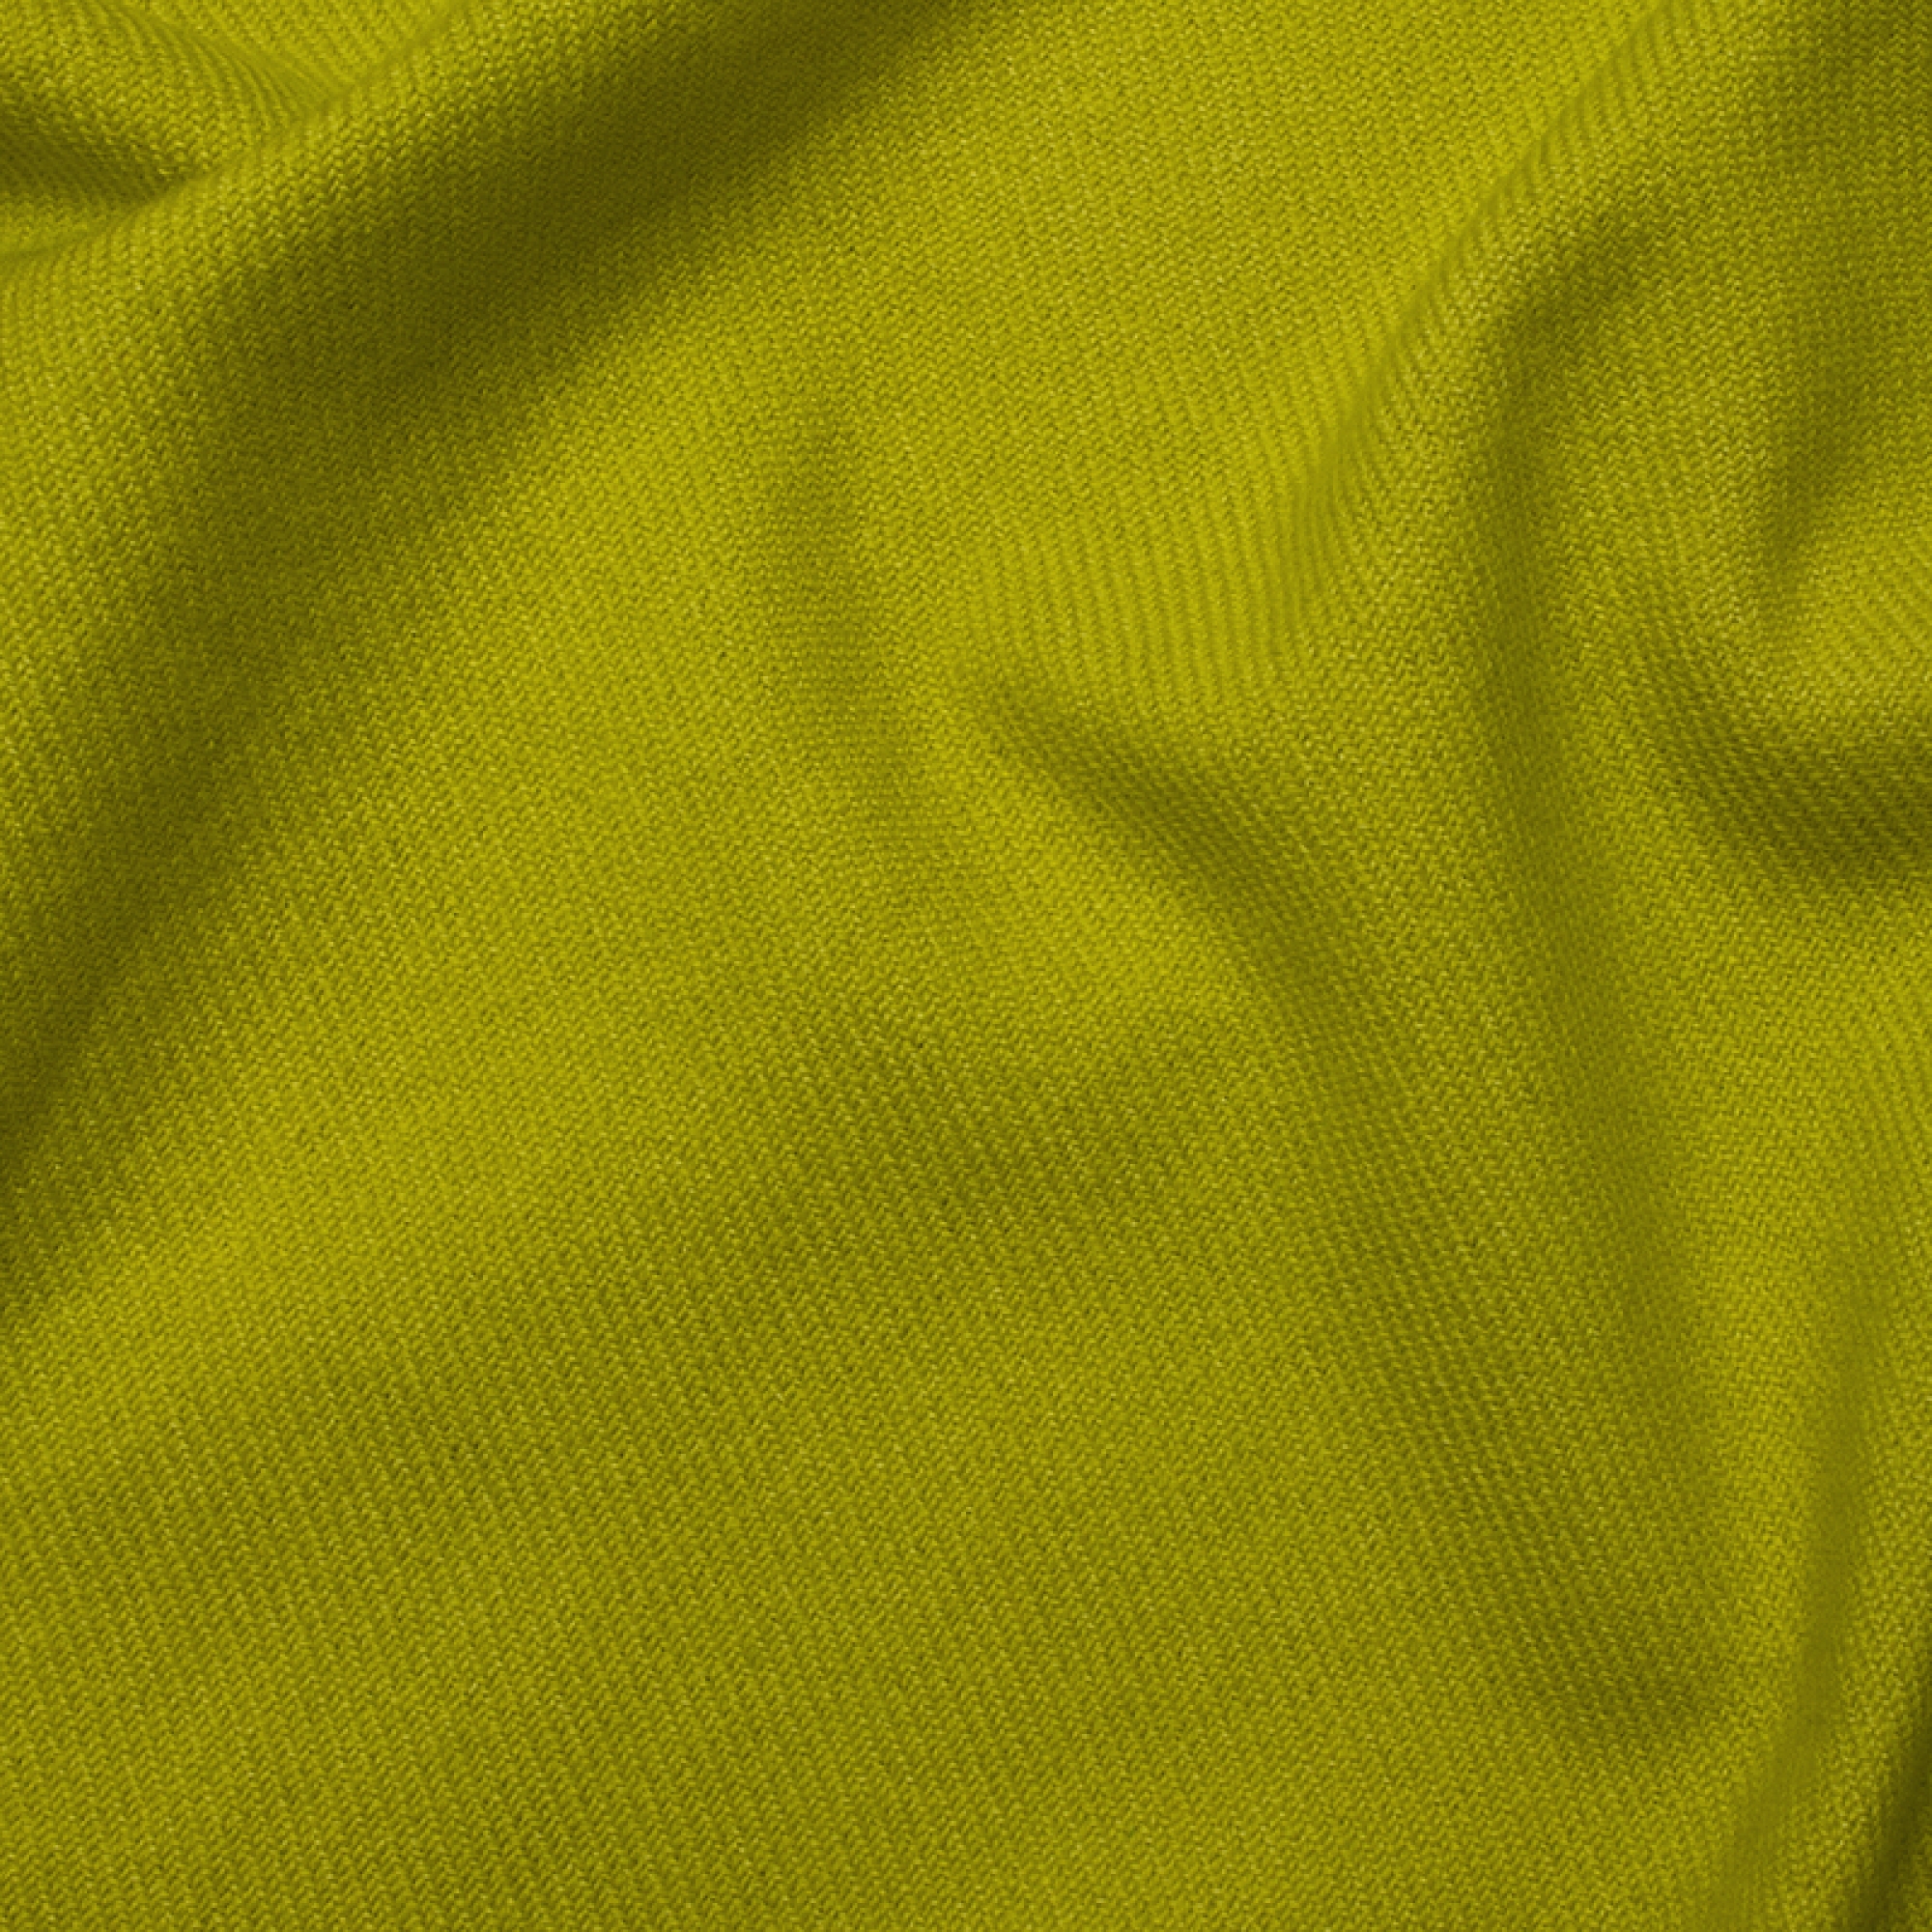 Cashmere accessories blanket toodoo plain s 140 x 200 chartreuse 140 x 200 cm